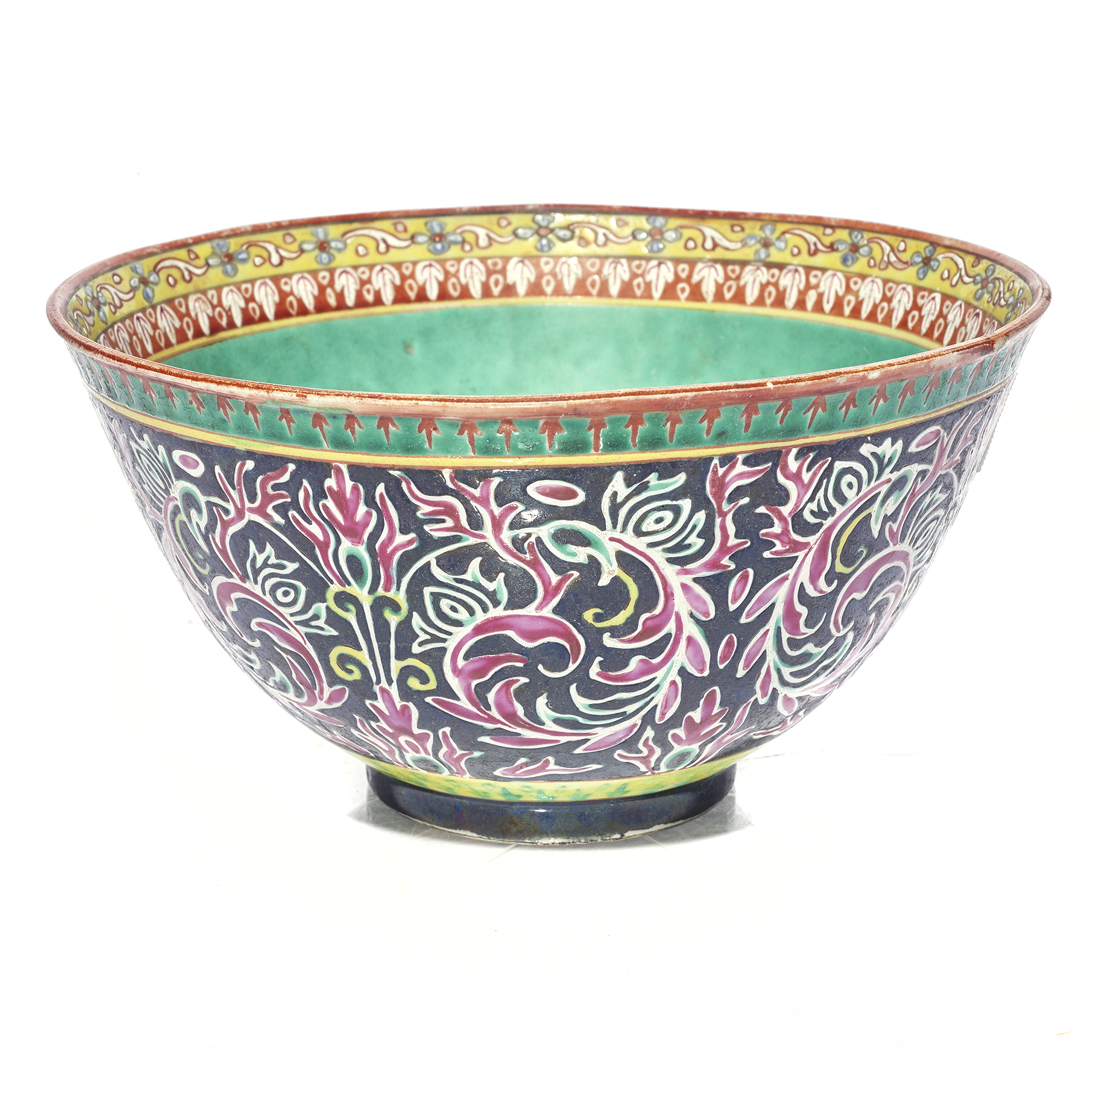 CHINESE EXPORT ENAMELED BOWL FOR